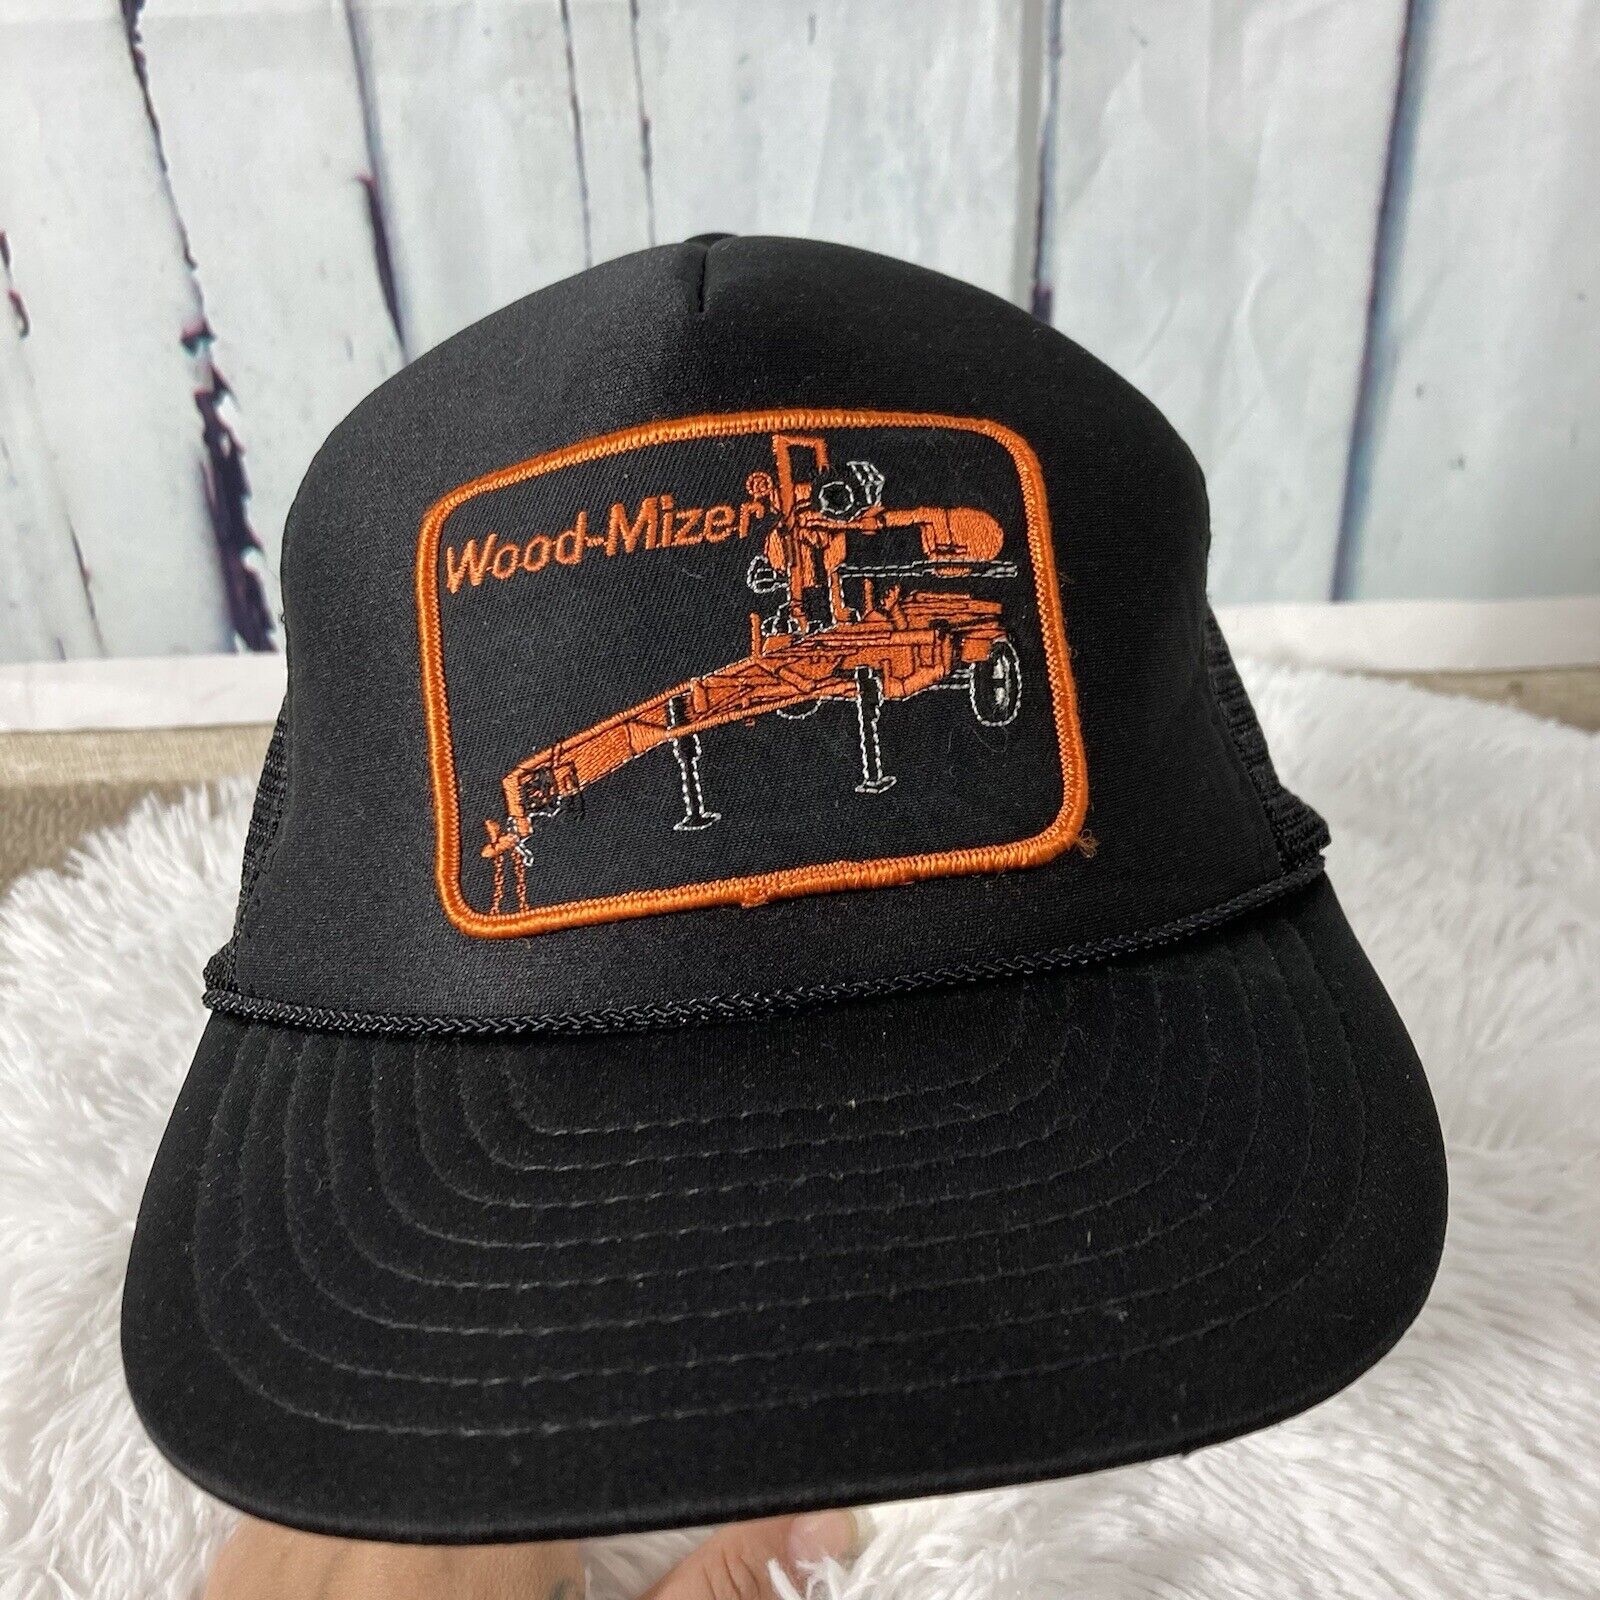 Vintage Woodmizer Sawmill Trucker Snap Back Black Hat Perfect Gift